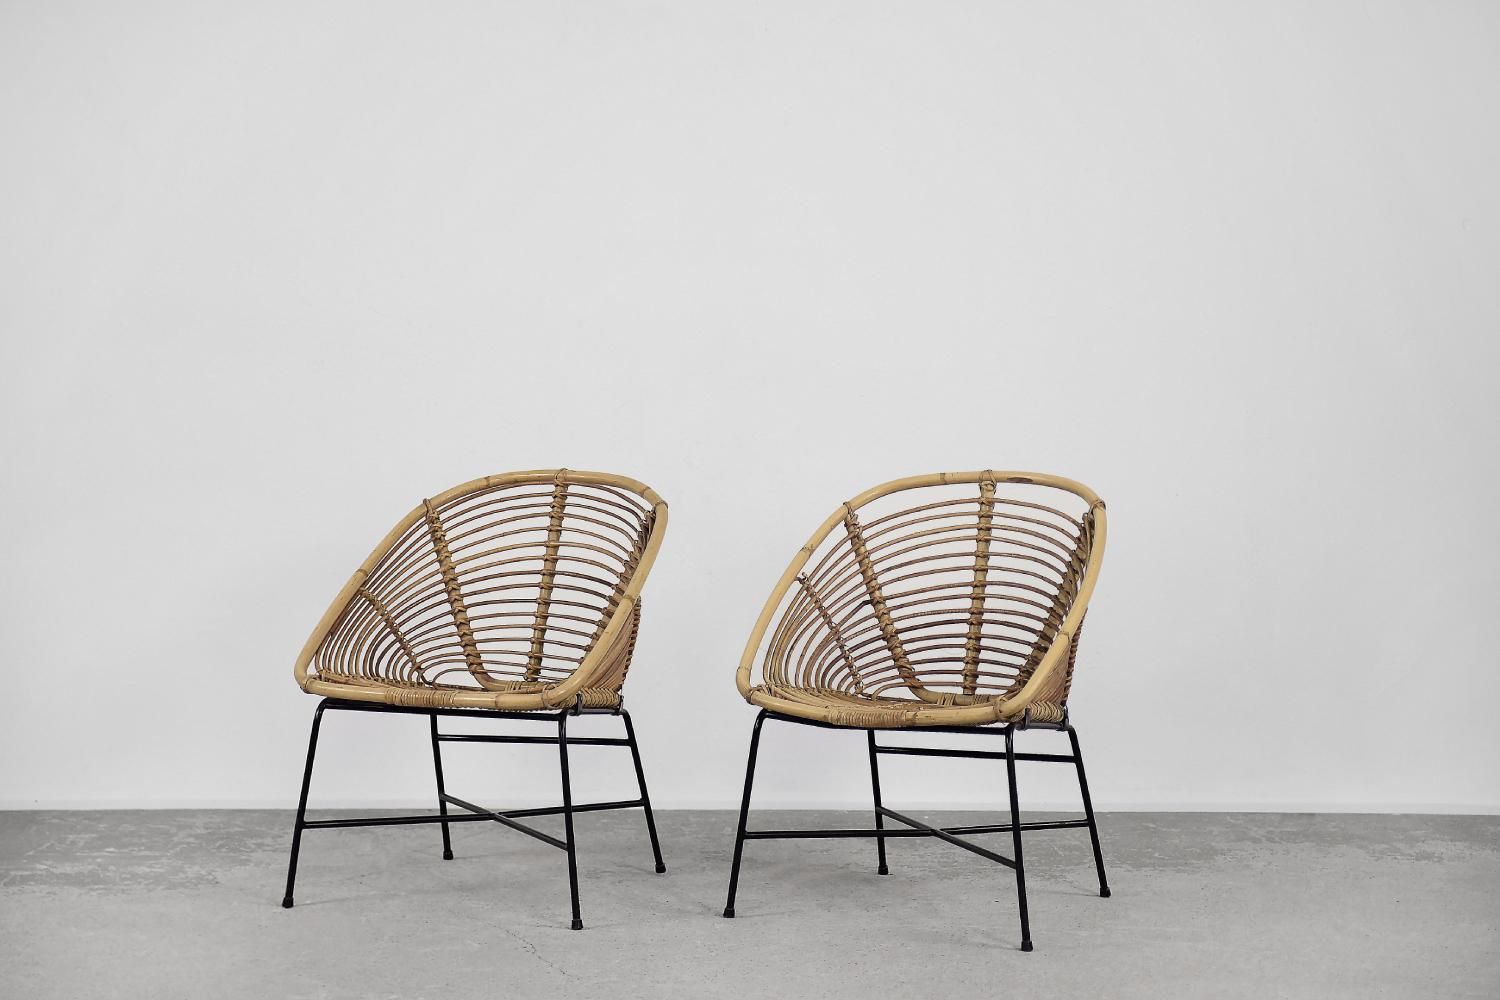 Pair of Vintage Mid-Century Modern Black Metal & Natural Bamboo Chairs, 1960s In Good Condition For Sale In Warszawa, Mazowieckie